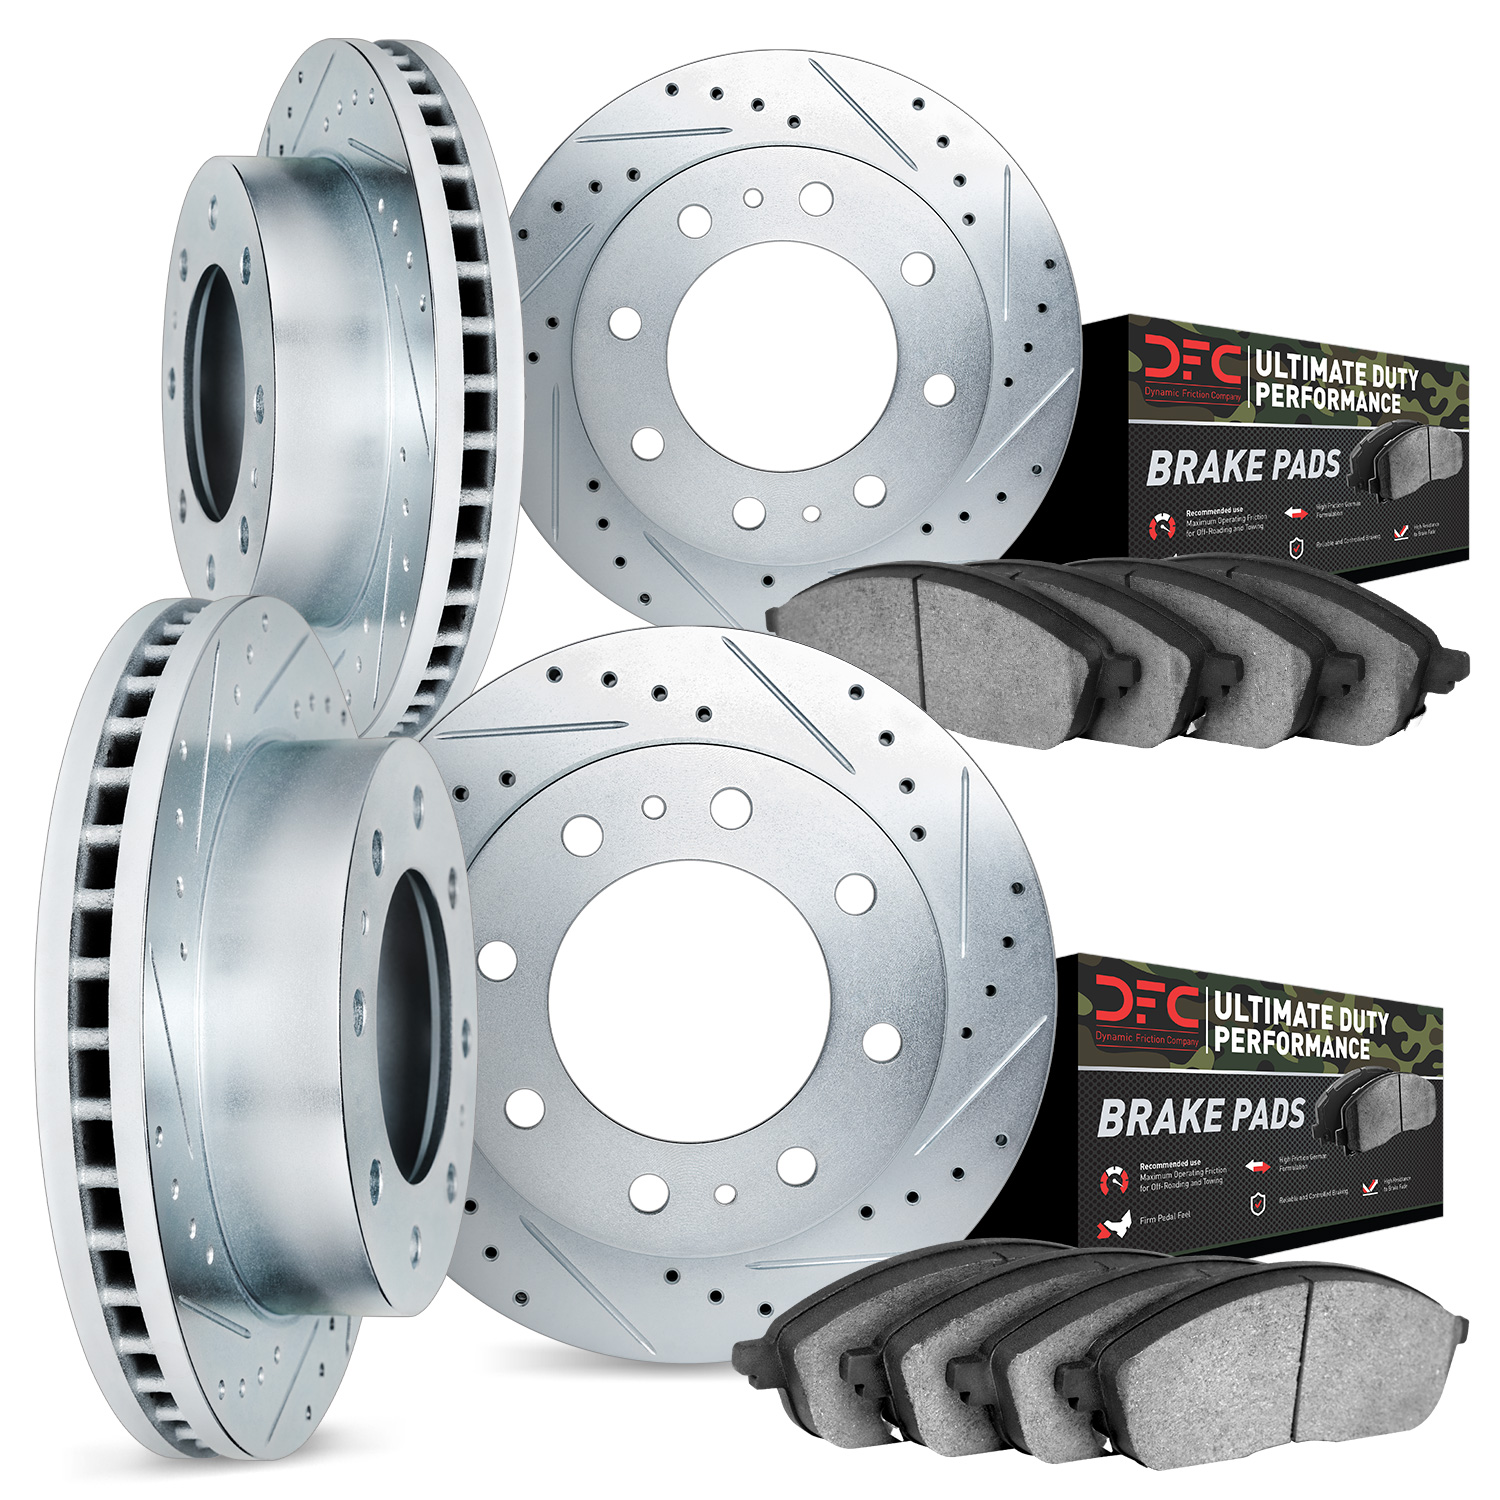 7404-54047 Drilled/Slotted Brake Rotors with Ultimate-Duty Brake Pads Kit [Silver], 2005-2007 Ford/Lincoln/Mercury/Mazda, Positi